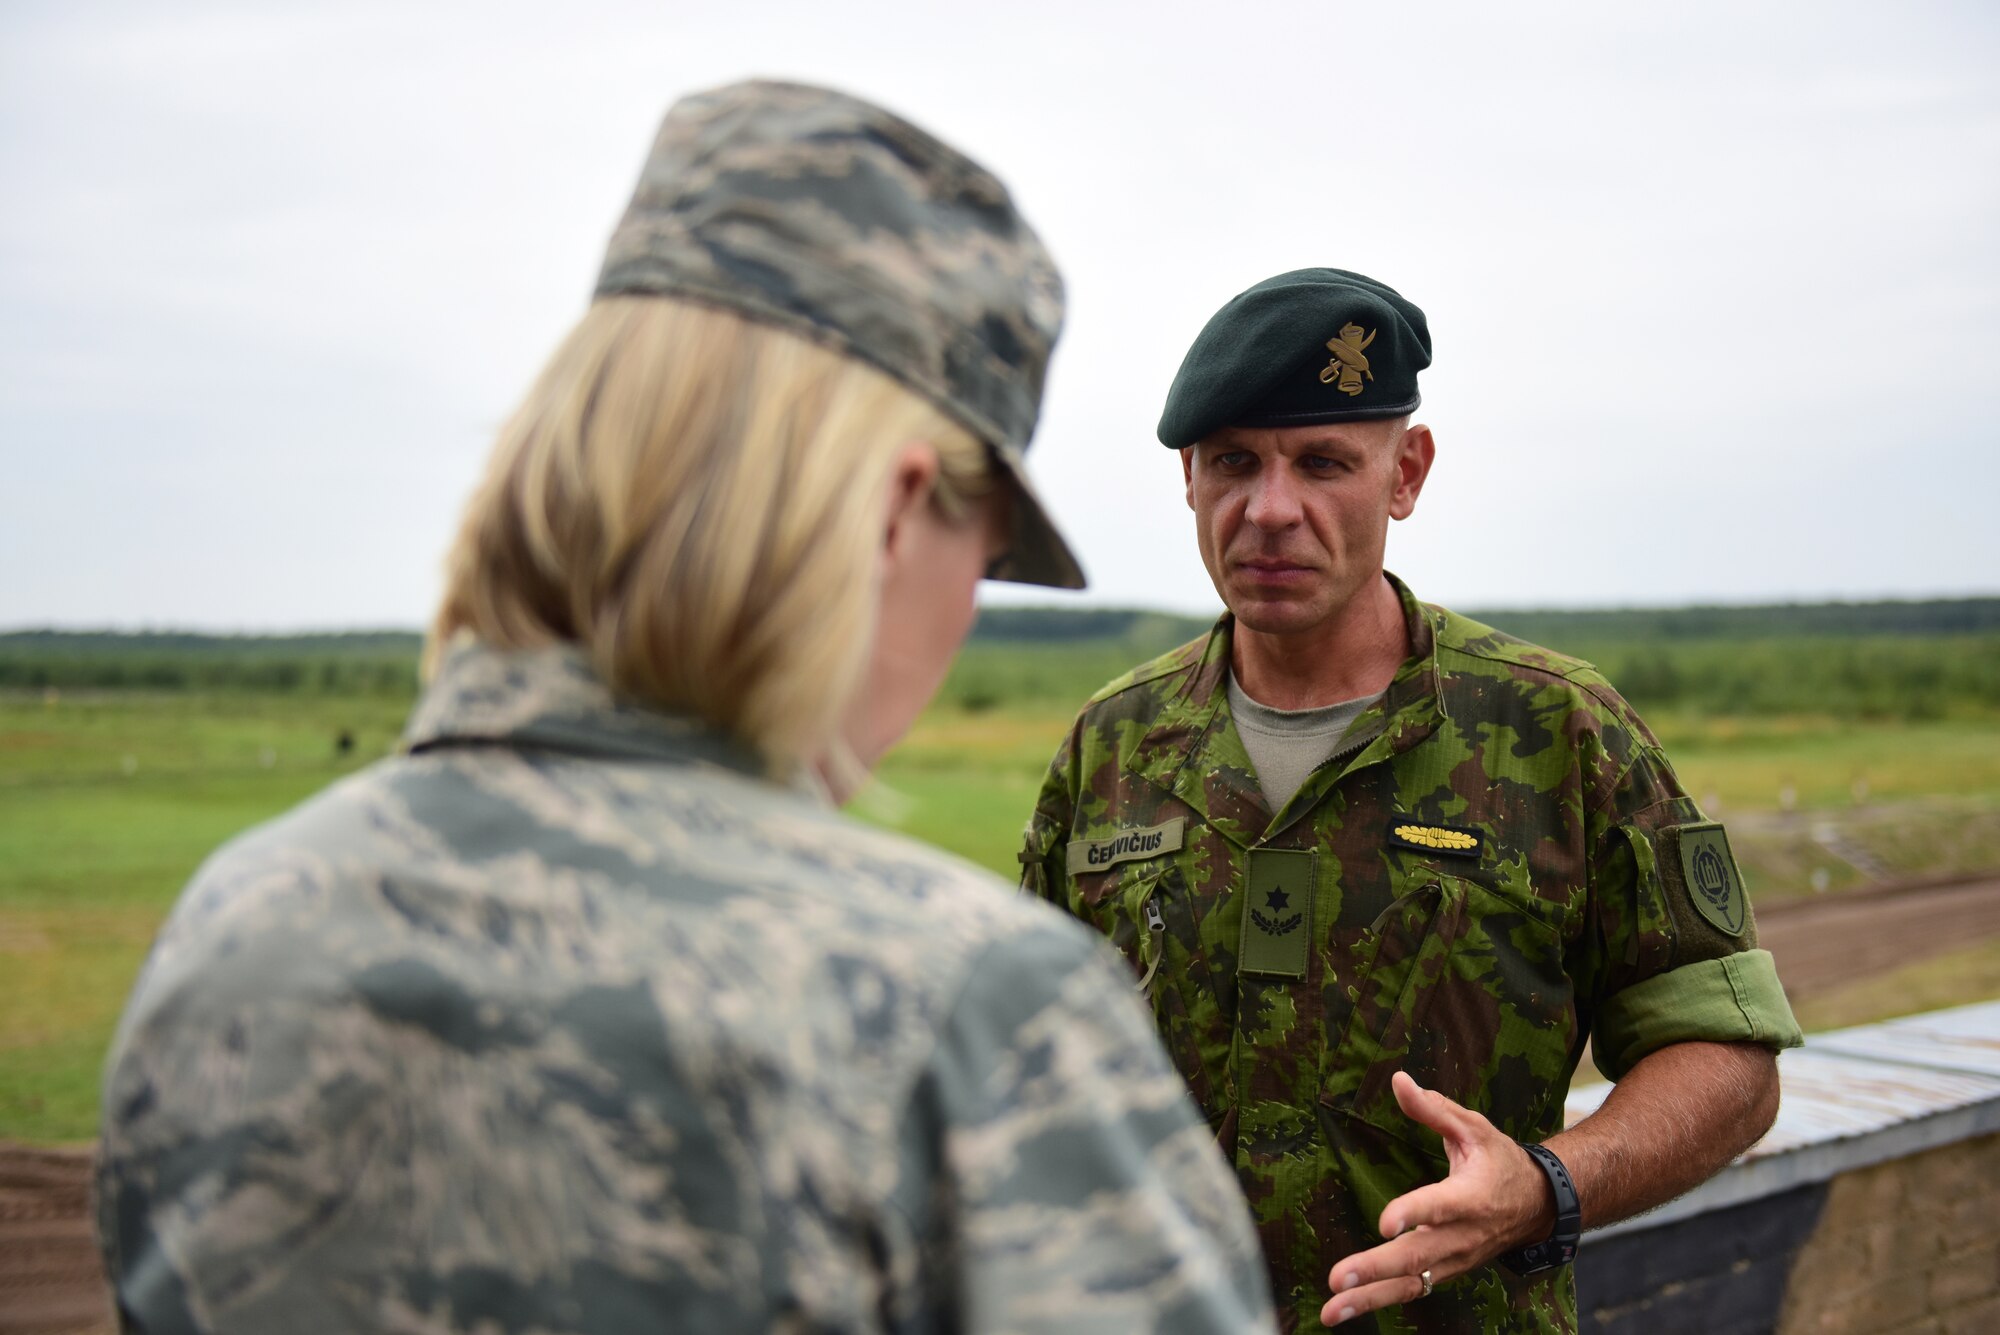 Lithuanian Maj. Kestutis Cekavicius, training area commander at the Brigadier General Kazio Veverskis Training Grounds, Kazlu Ruda, Lithuania, commends the work of Pennsylvania Air National Guardsmen during an interview Aug. 13, 2018, at the site of a new military air-to-ground training range there. Cekavicius is overseeing the work at the military range, constructed by primarily Pennsylvania Air National Guard Airmen and designed to be used by Lithuanian and other NATO forces. (U.S. Air National Guard photo by Tech. Sgt. Claire Behney/Released)